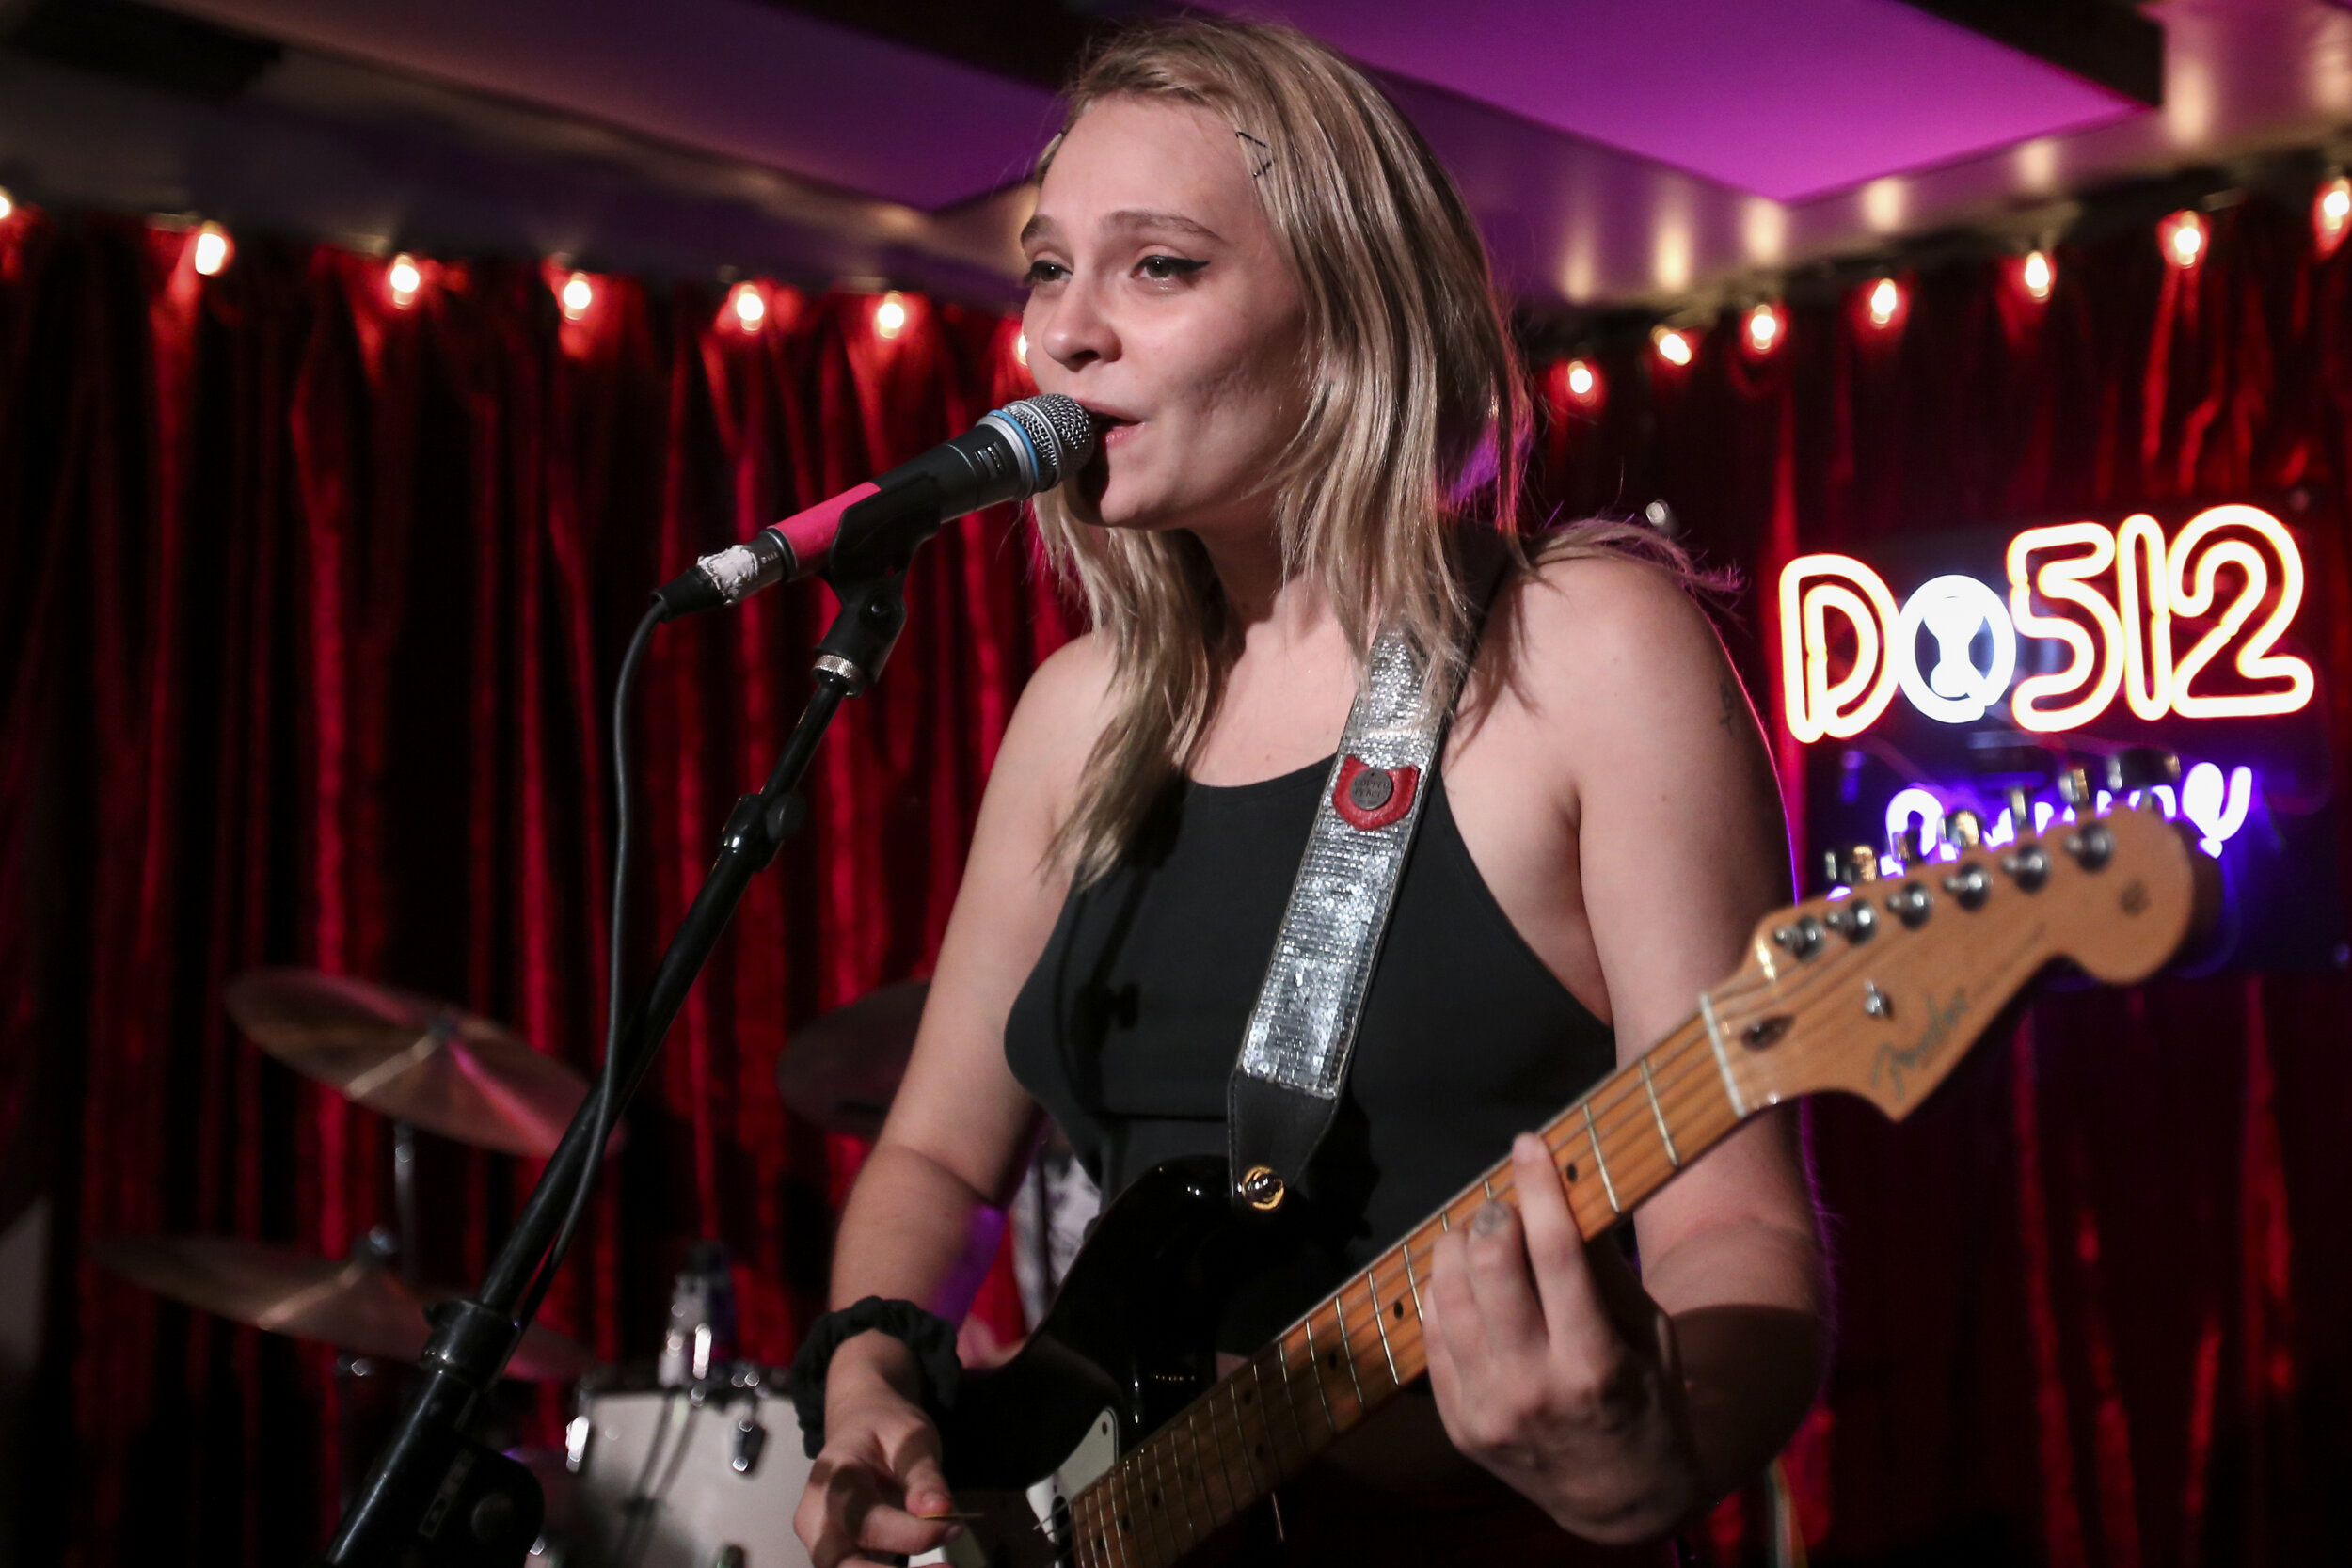  Cherry Glazerr performs at do512 following her performance at ACL. 